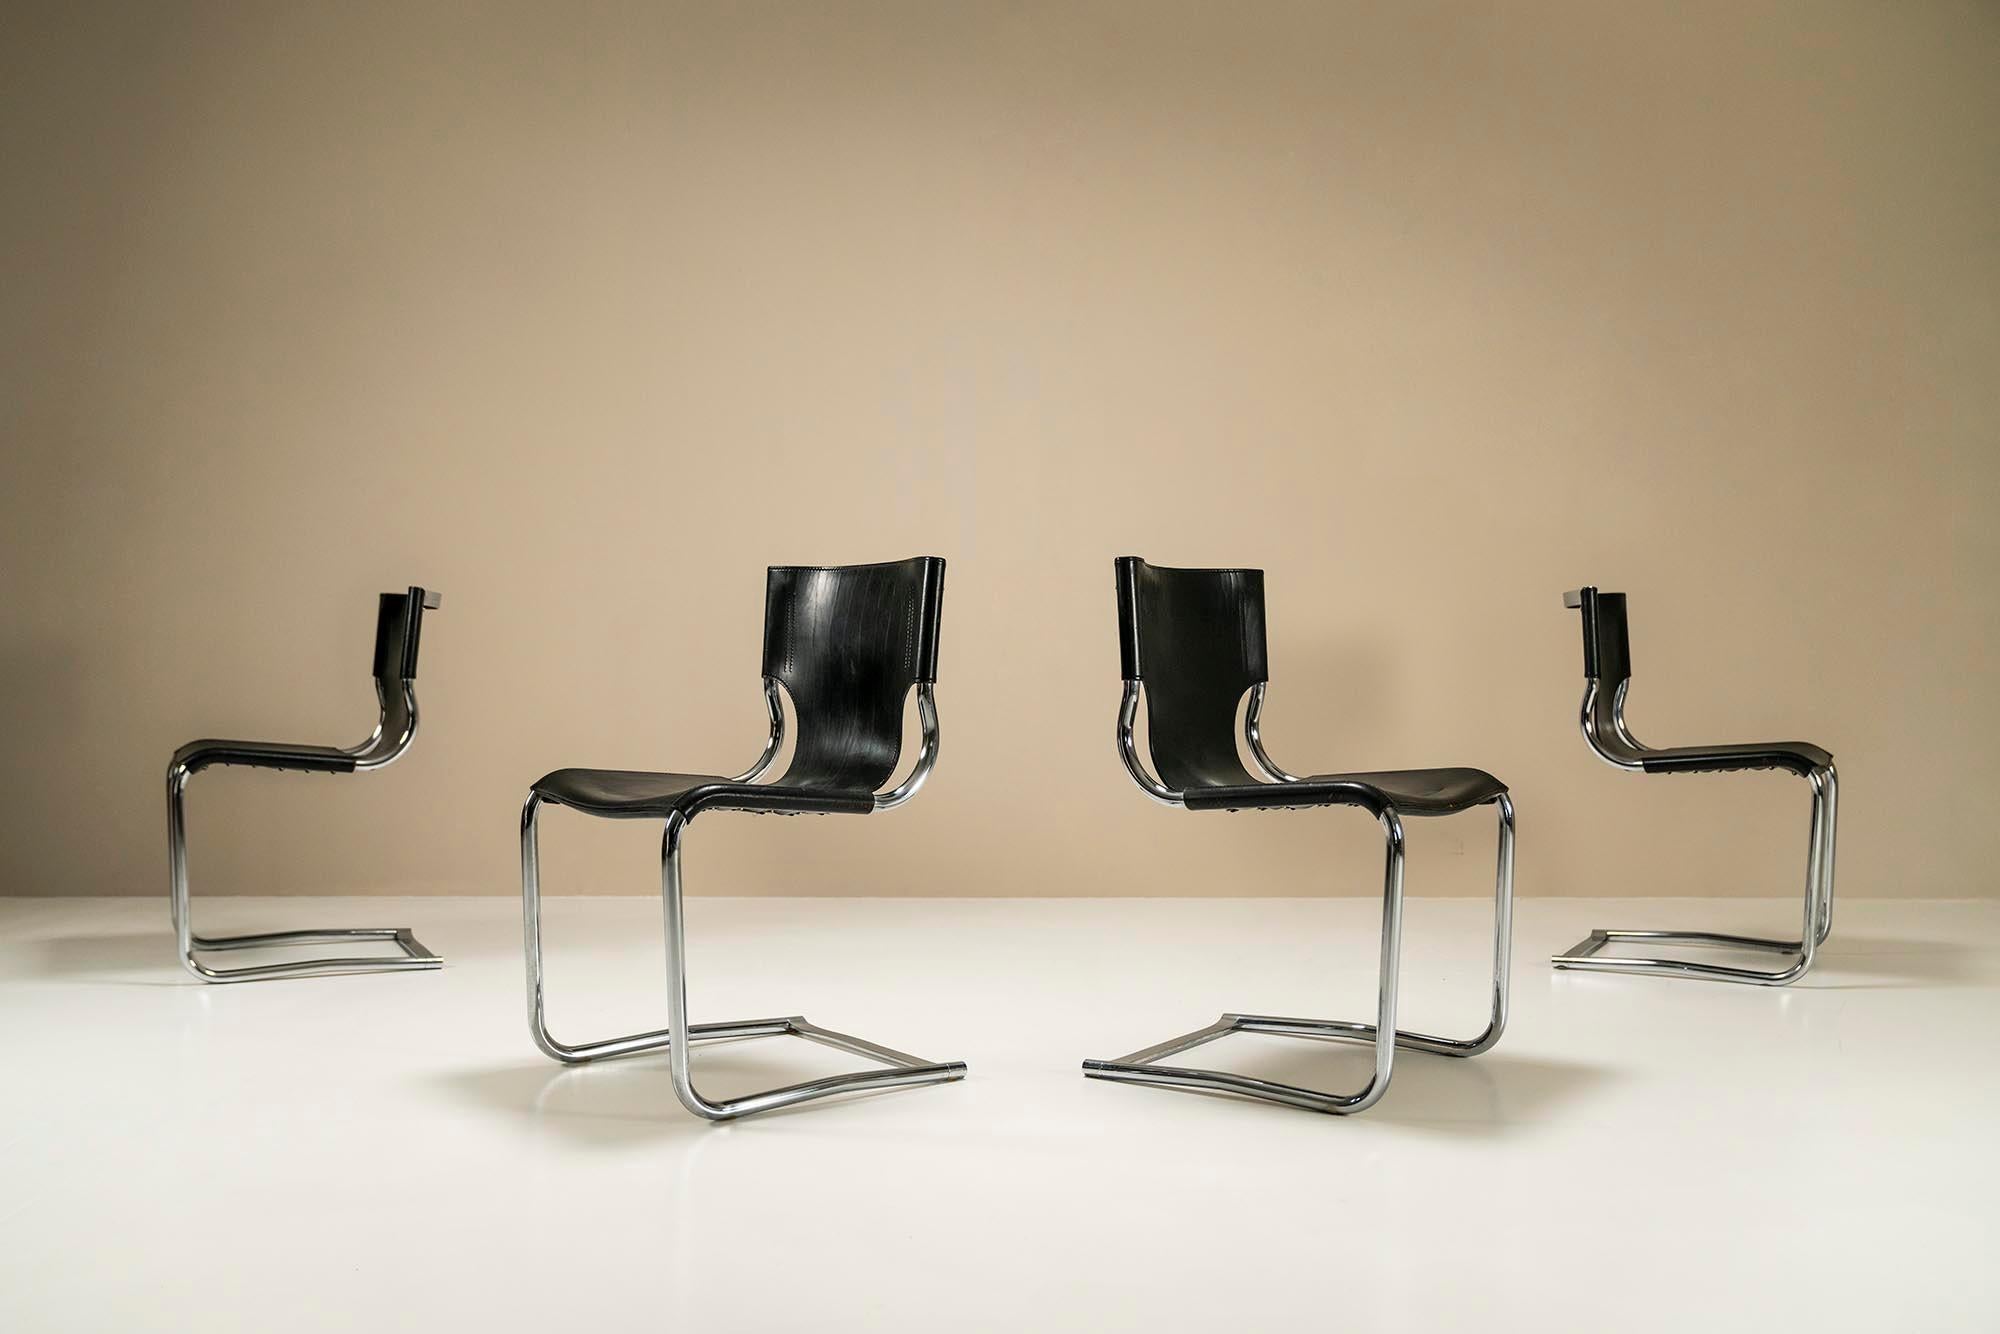 The Carlo Bartoli '920' chairs embody timeless elegance and exceptional craftsmanship. Renowned for their minimalist design, these chairs exude sophistication and refinement, making them a coveted addition to any interior space.

The defining